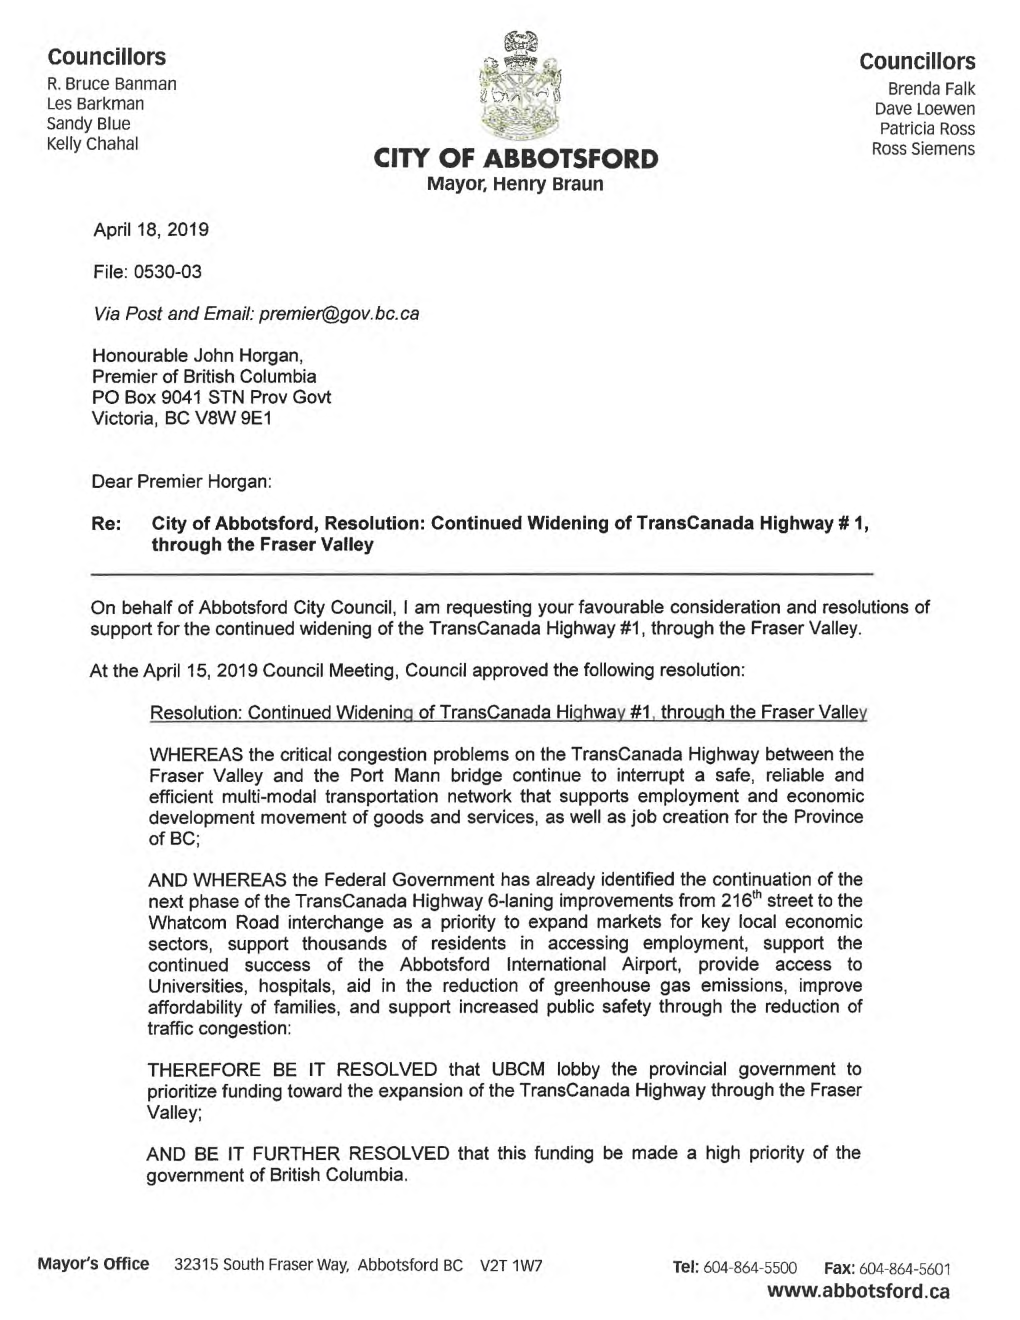 City of Abbotsford Resolution, Continued Widening Of